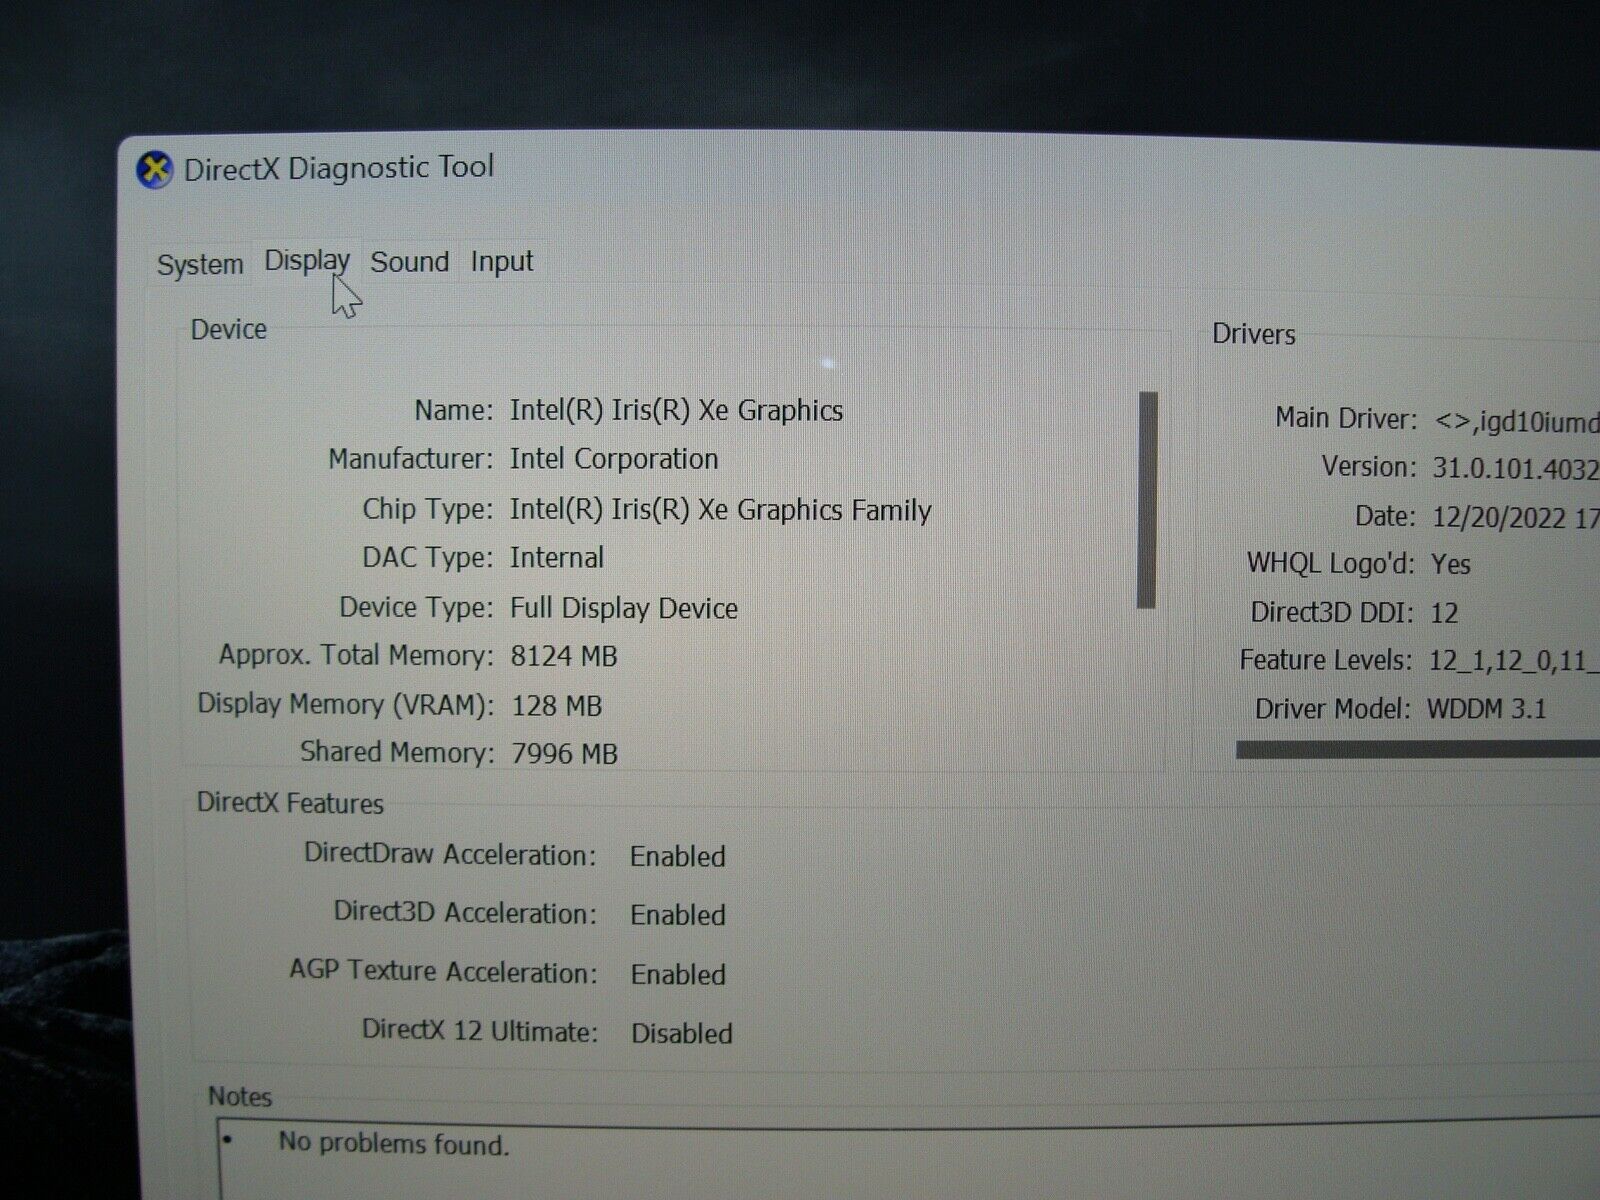 NEW 1 YR WRTY Dell XPS Plus 9320 13